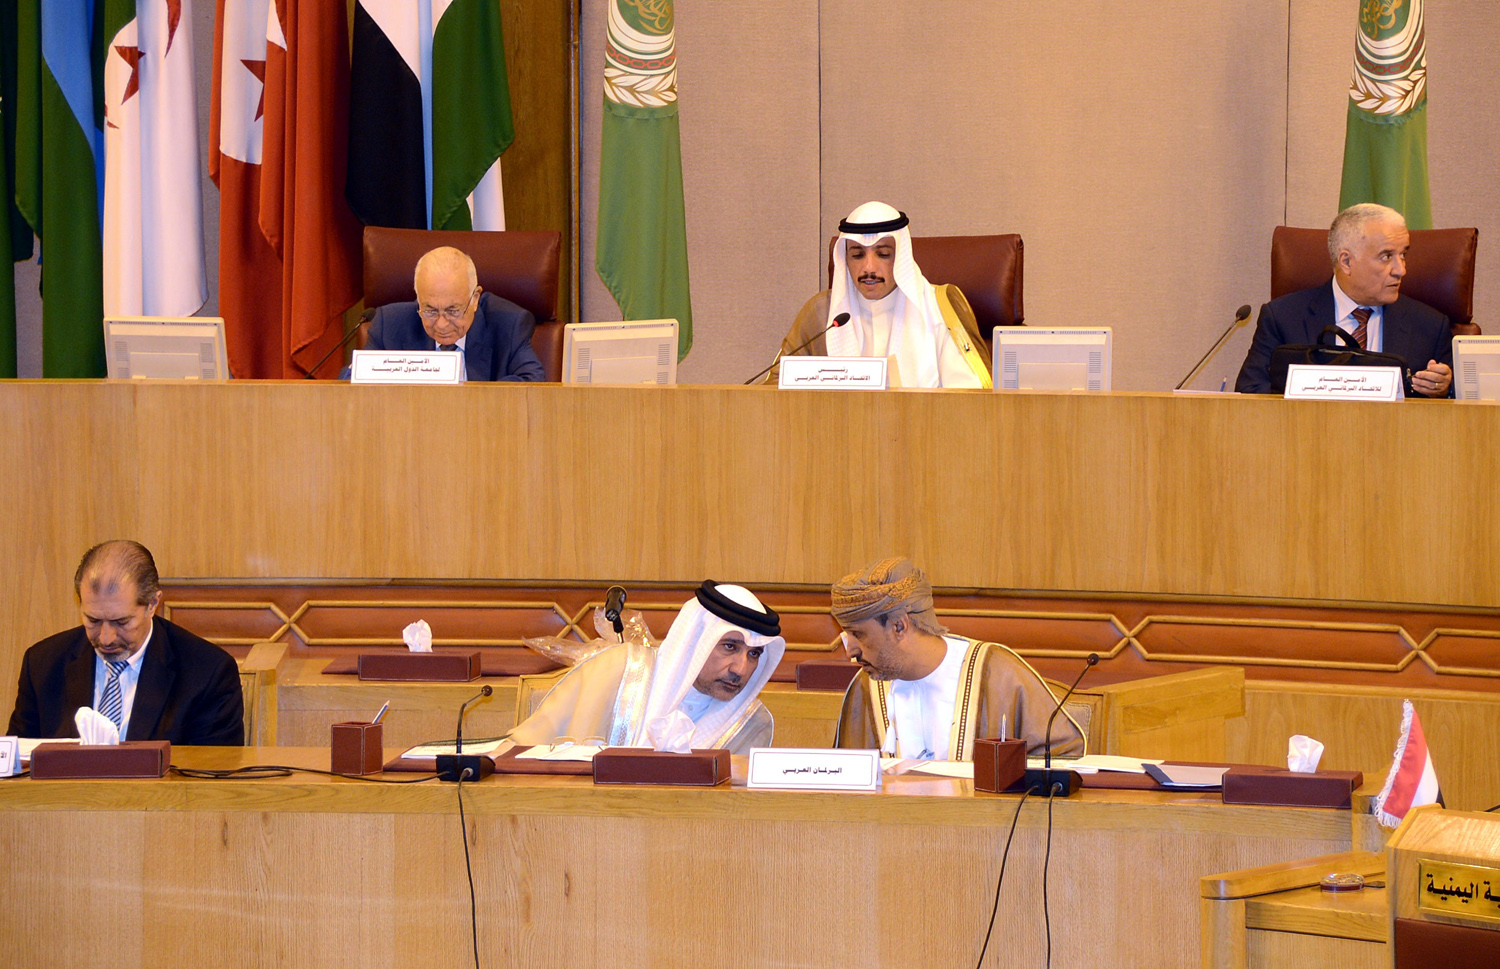 Arab Inter-Parliamentary Union (AIPU) President and Kuwaiti Speaker of the House Marzouq Al-Ghanim talks in the session